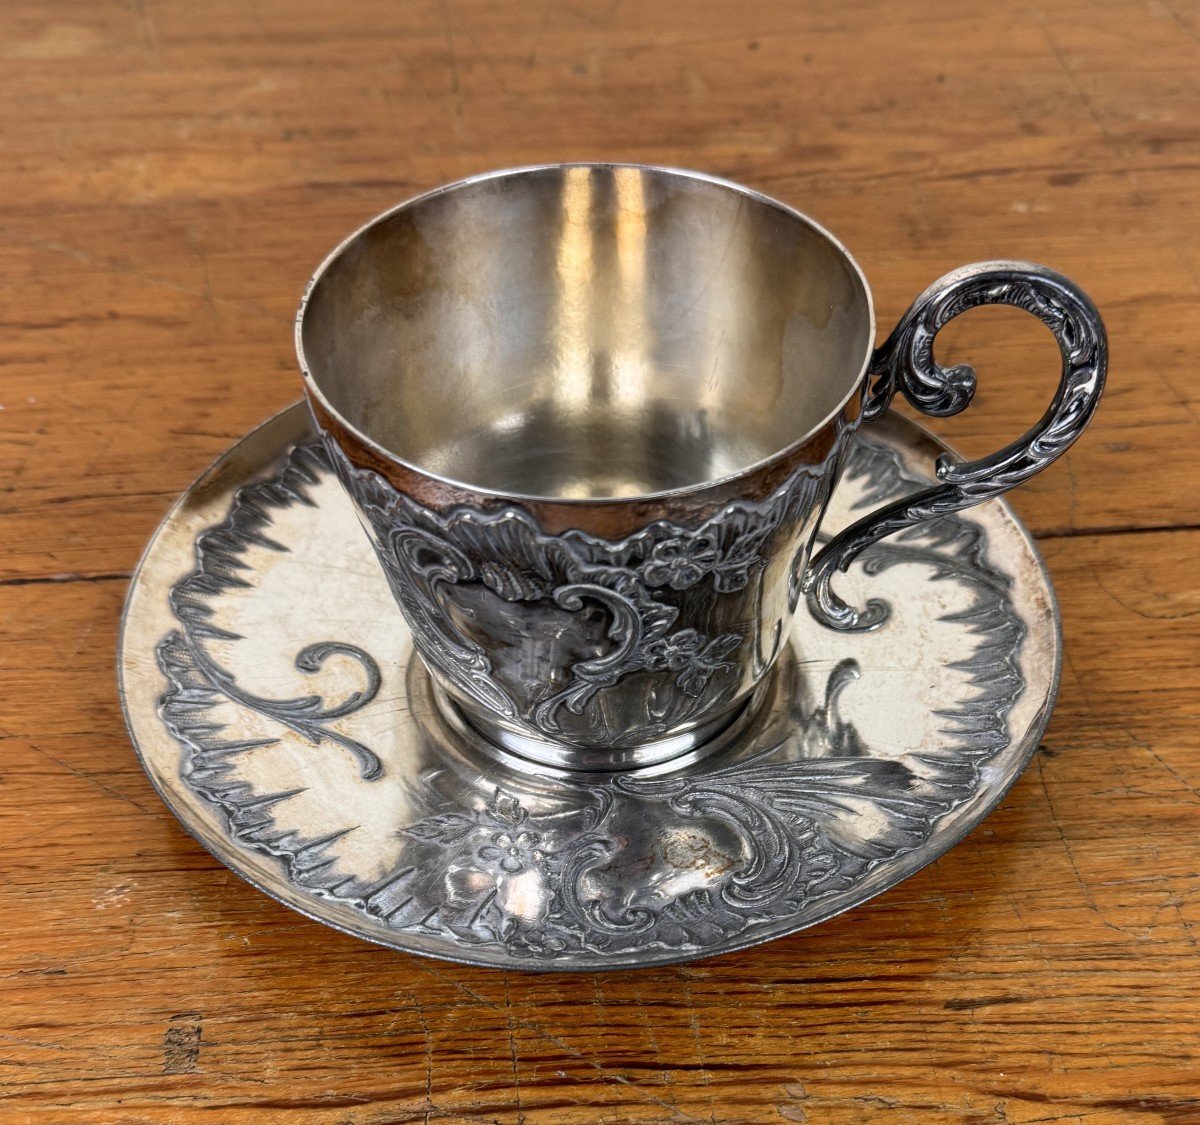 Gallia: Large Selfish Cup With Its Silver Metal Saucer